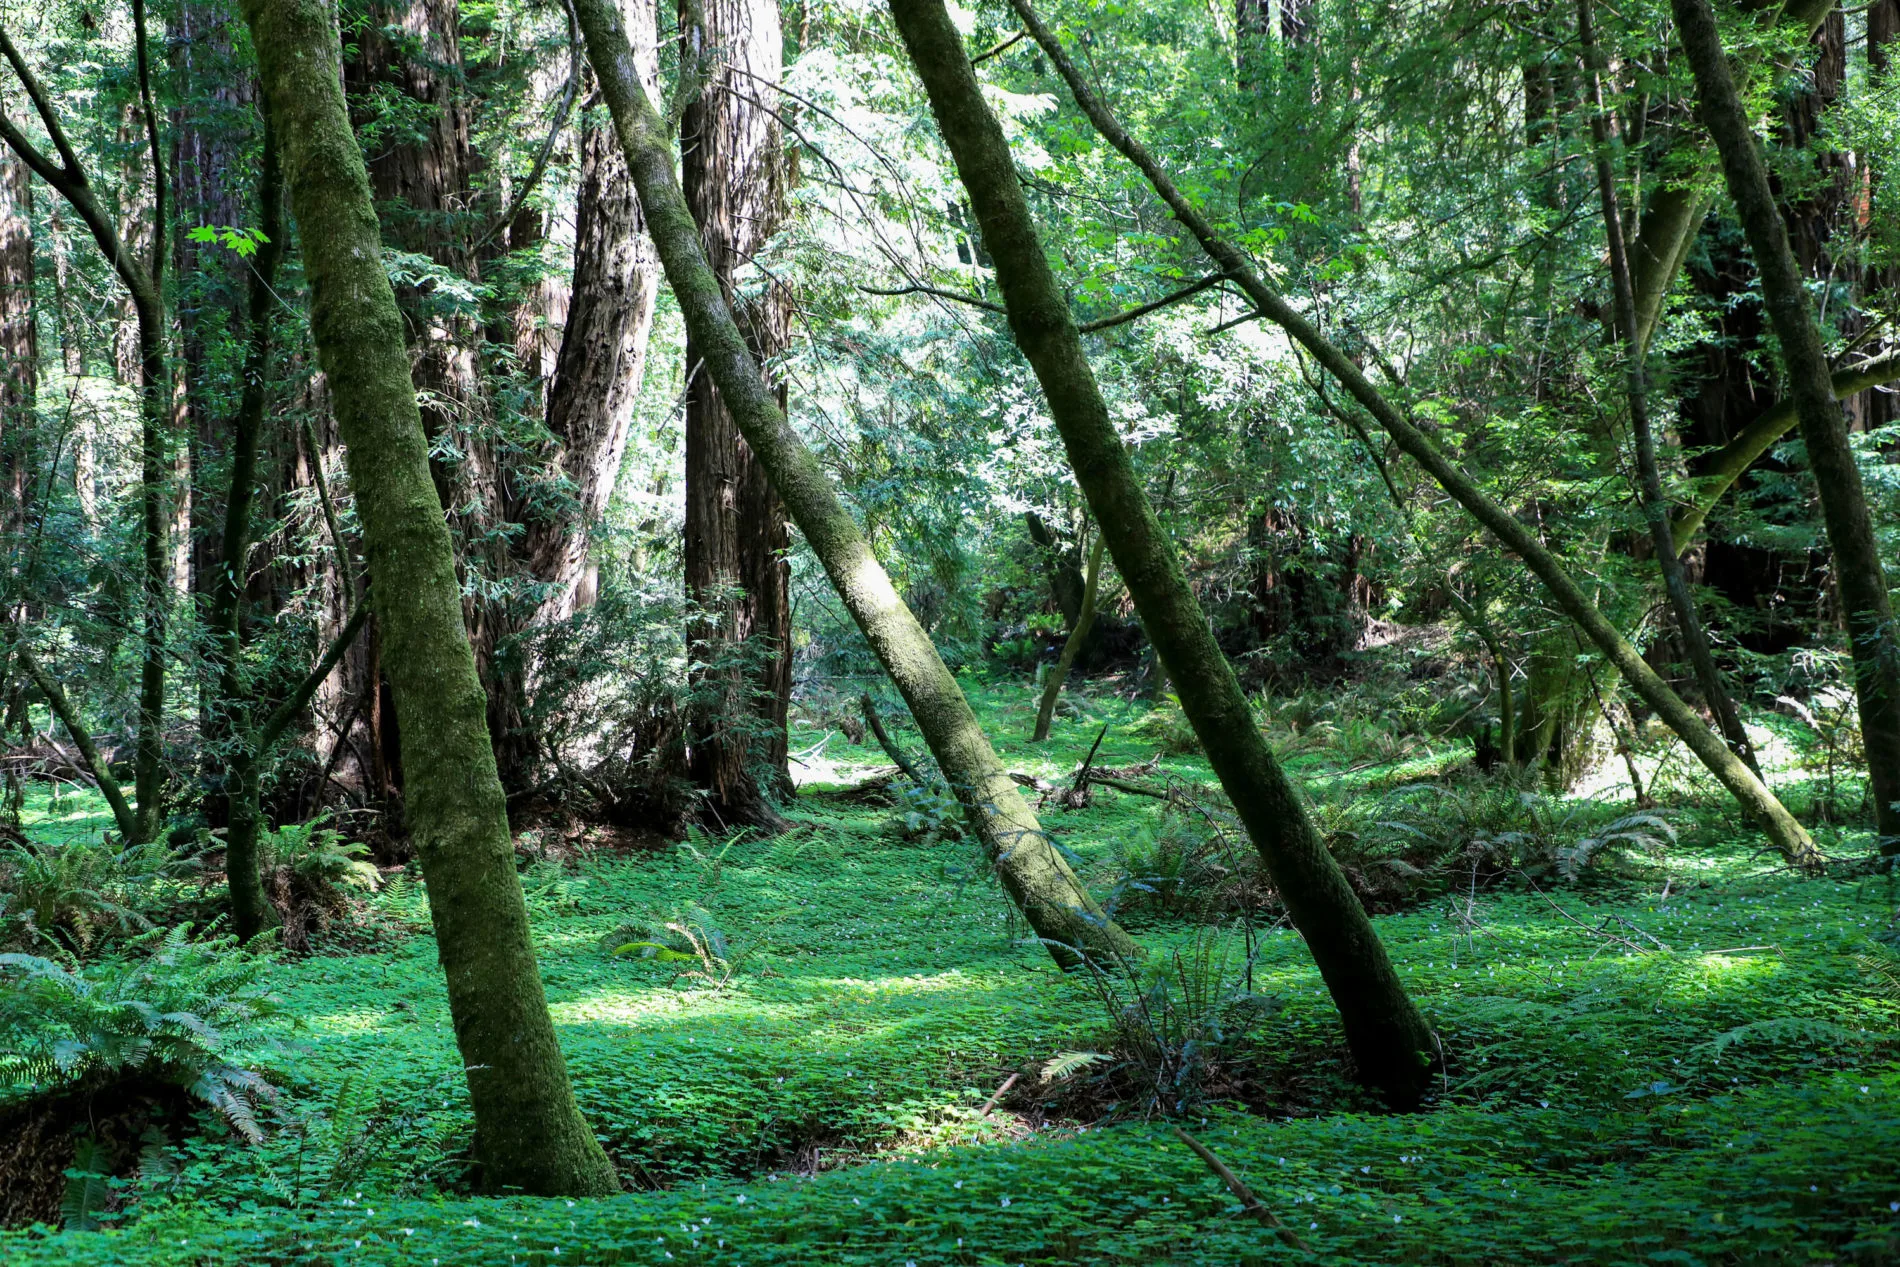 The forest floor is blanketed with redwood sorrel, a ground cover with small pink flowers and leaves similar to clover.